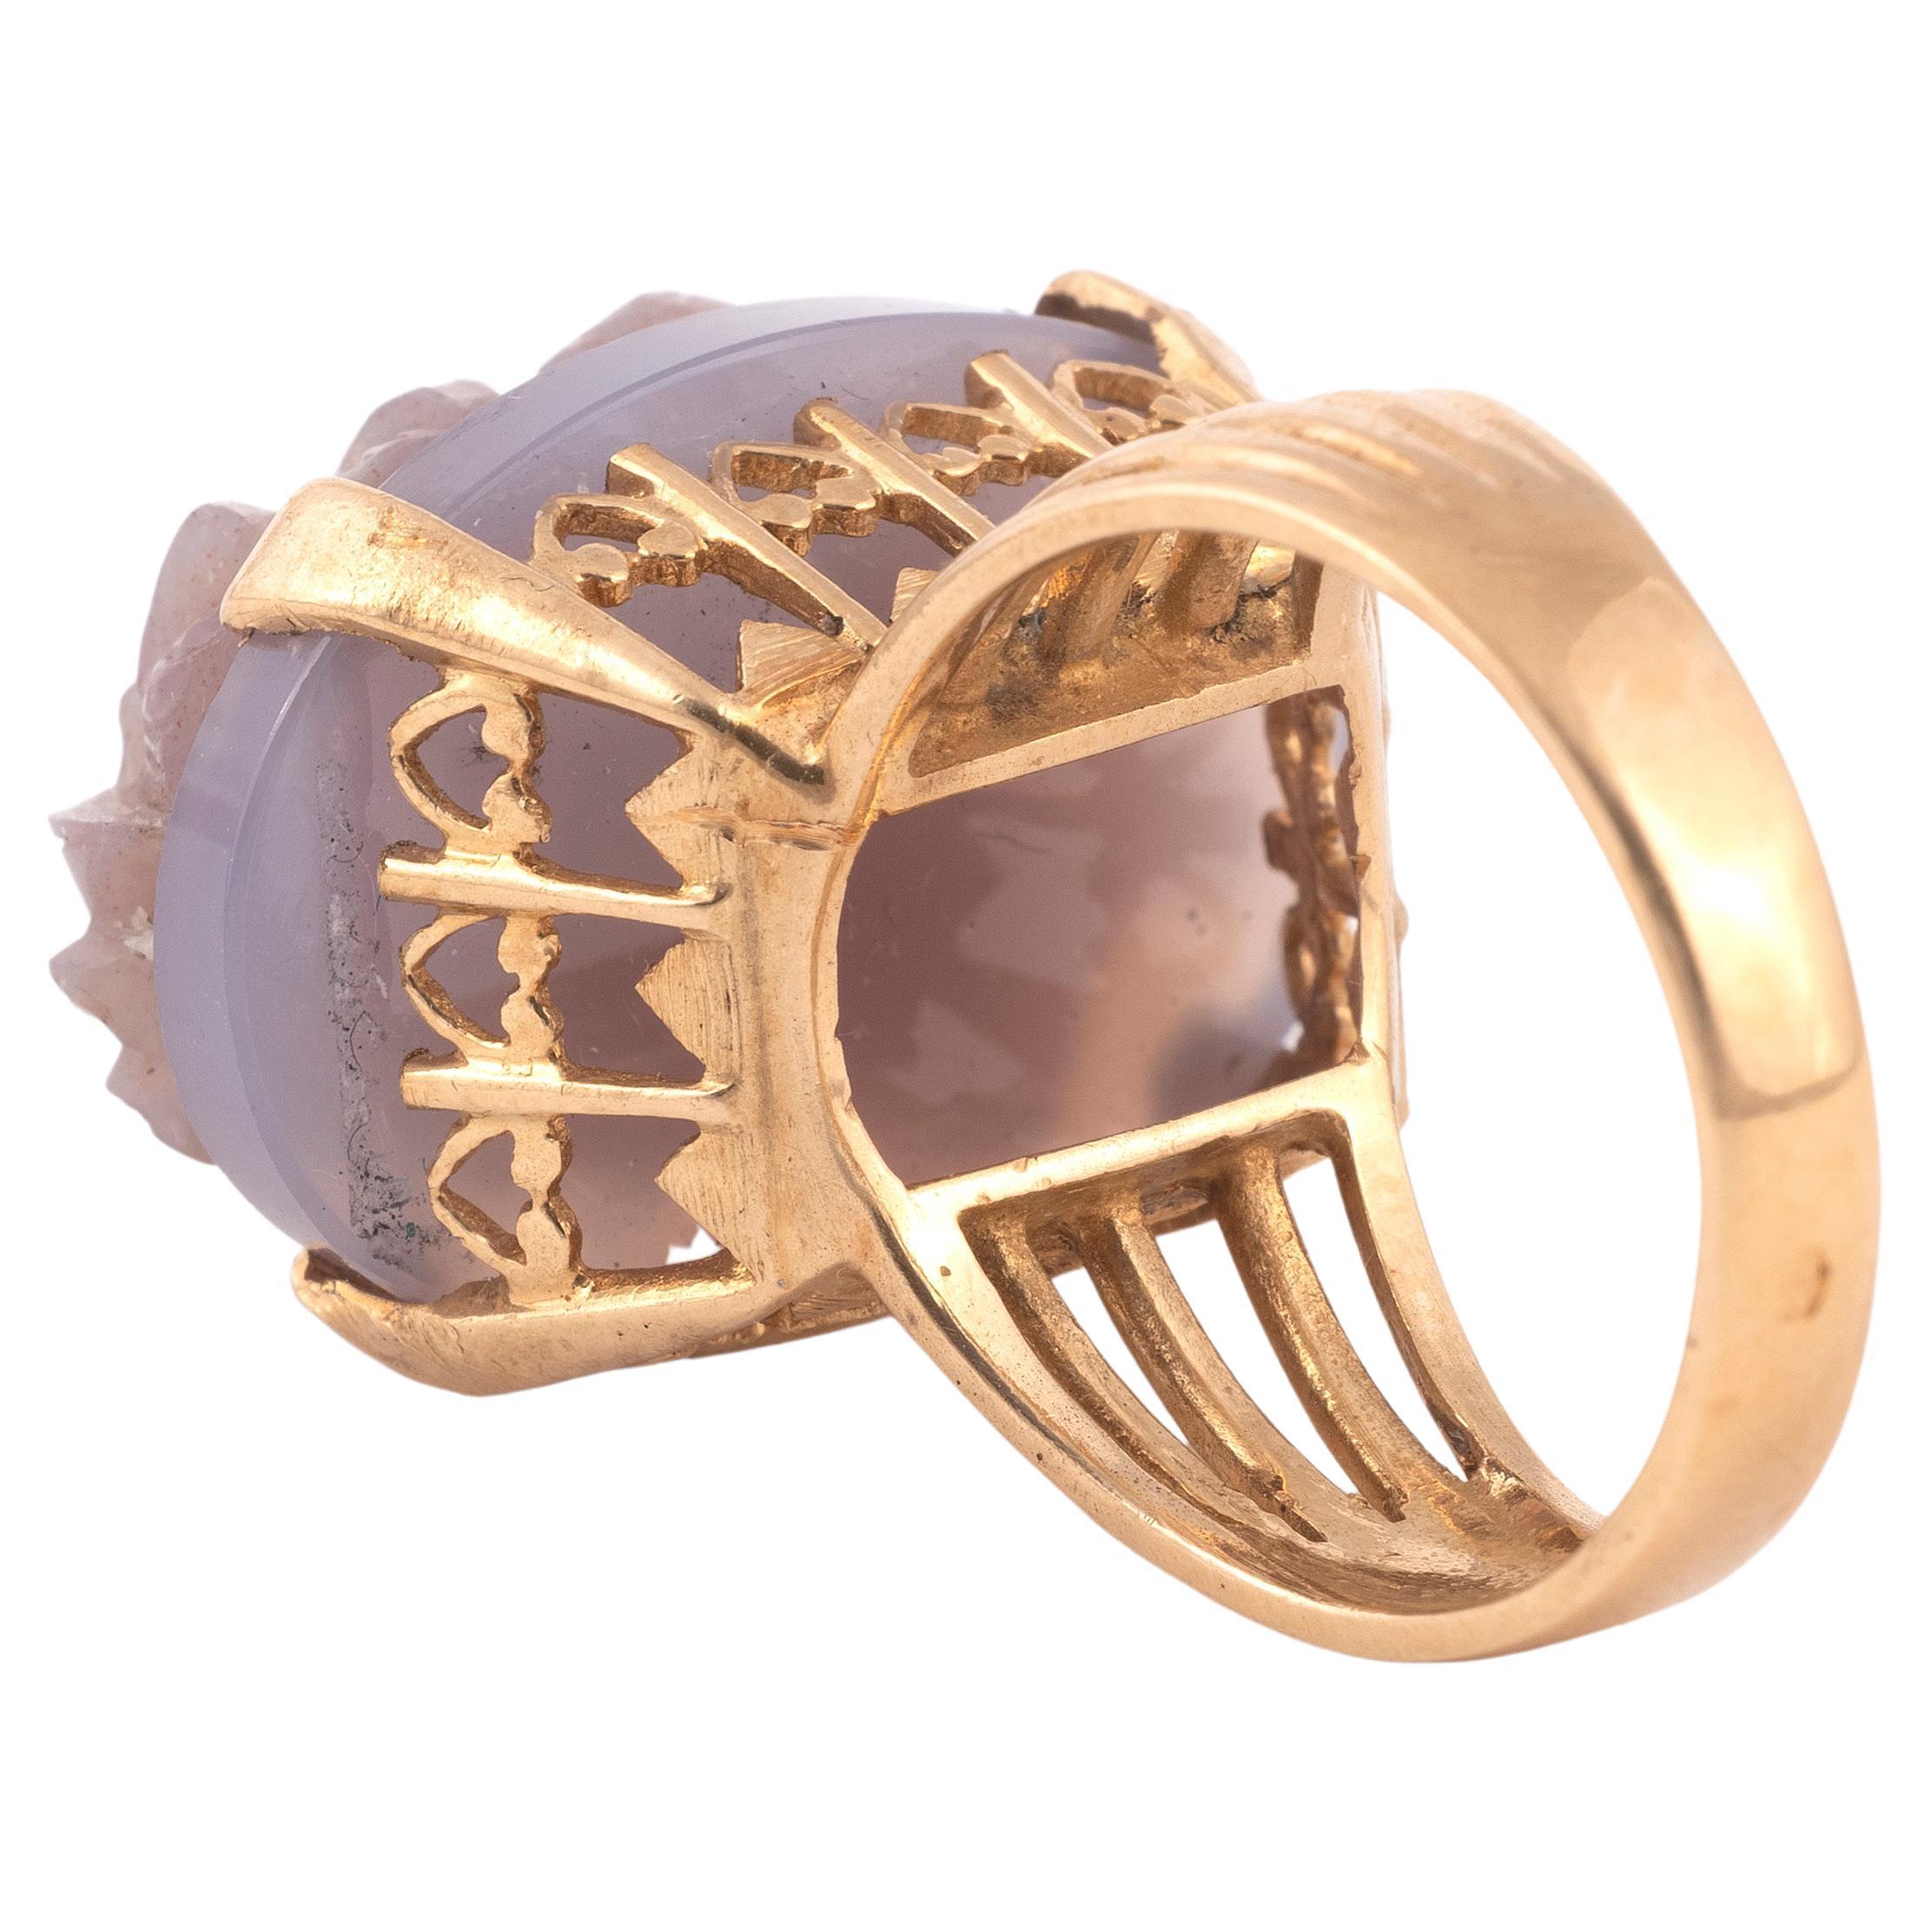 18Kt gold ring set with a cameo on lavender chalcedony stylizing a profile of a man with a waving beard, the setting on five wires and openwork hearts. Top size is 23mm x 21mm
Finger size: 8
Weight: 12 g